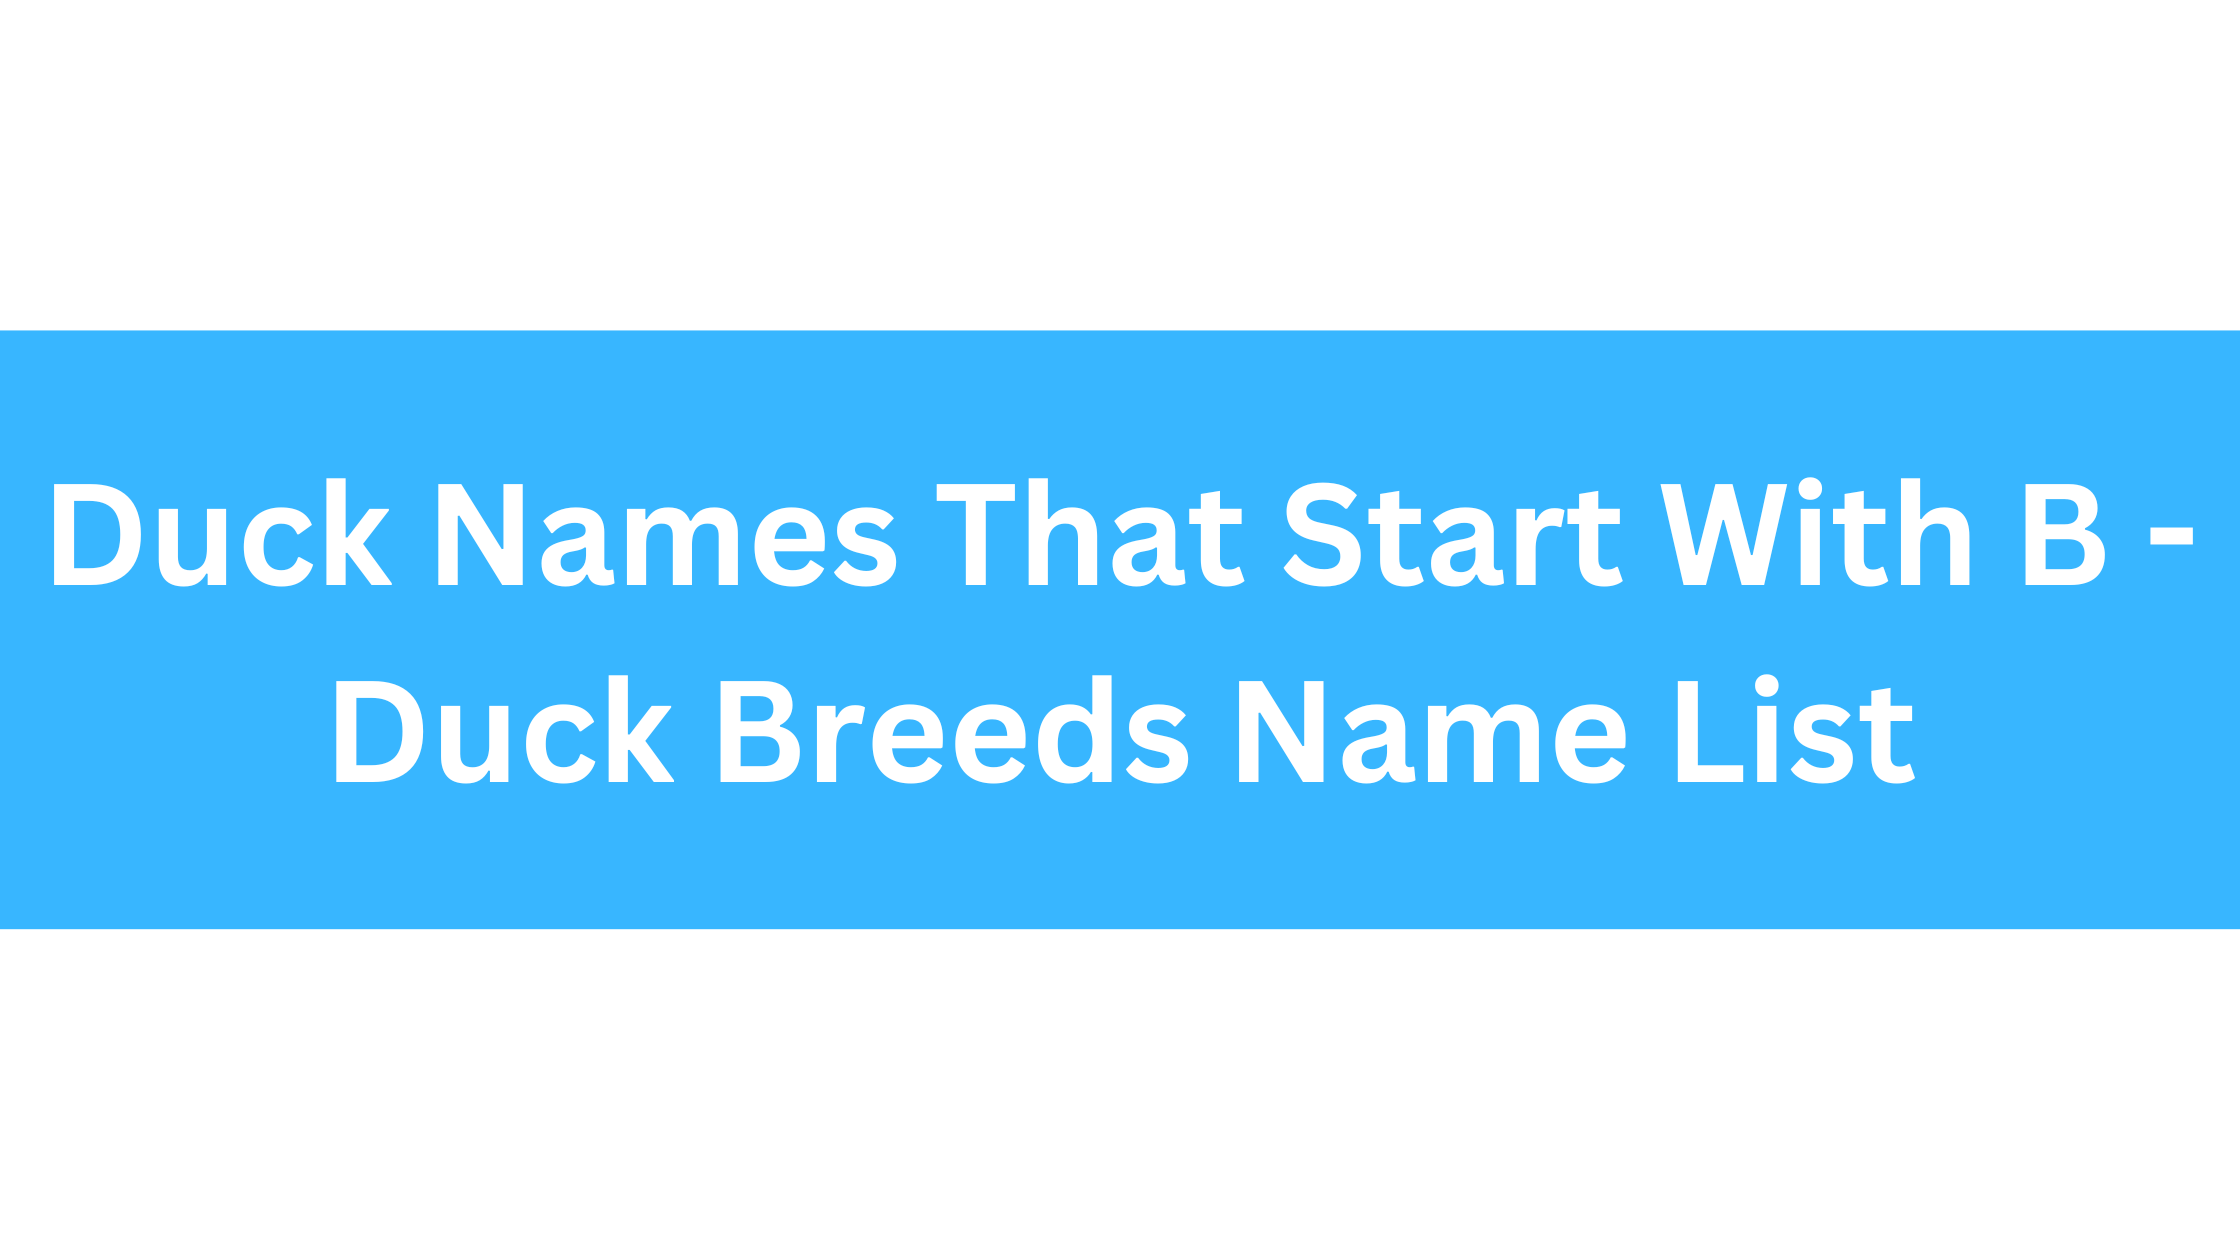 Duck Names That Start With B